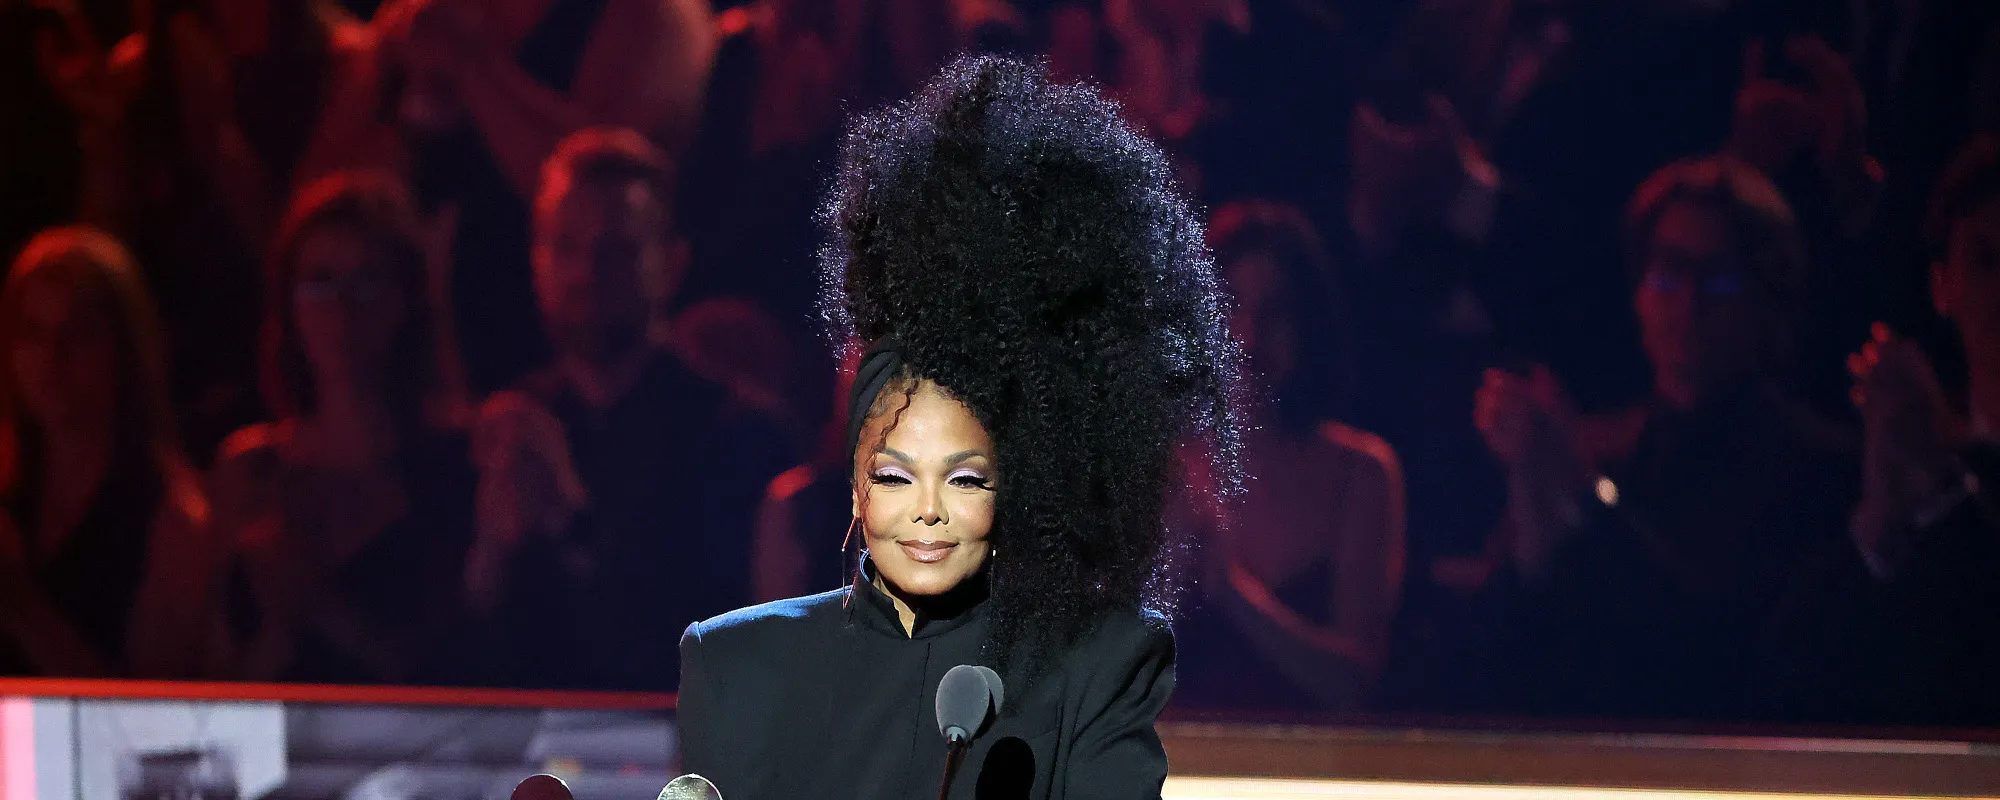 5 Things to Know About Janet Jackson